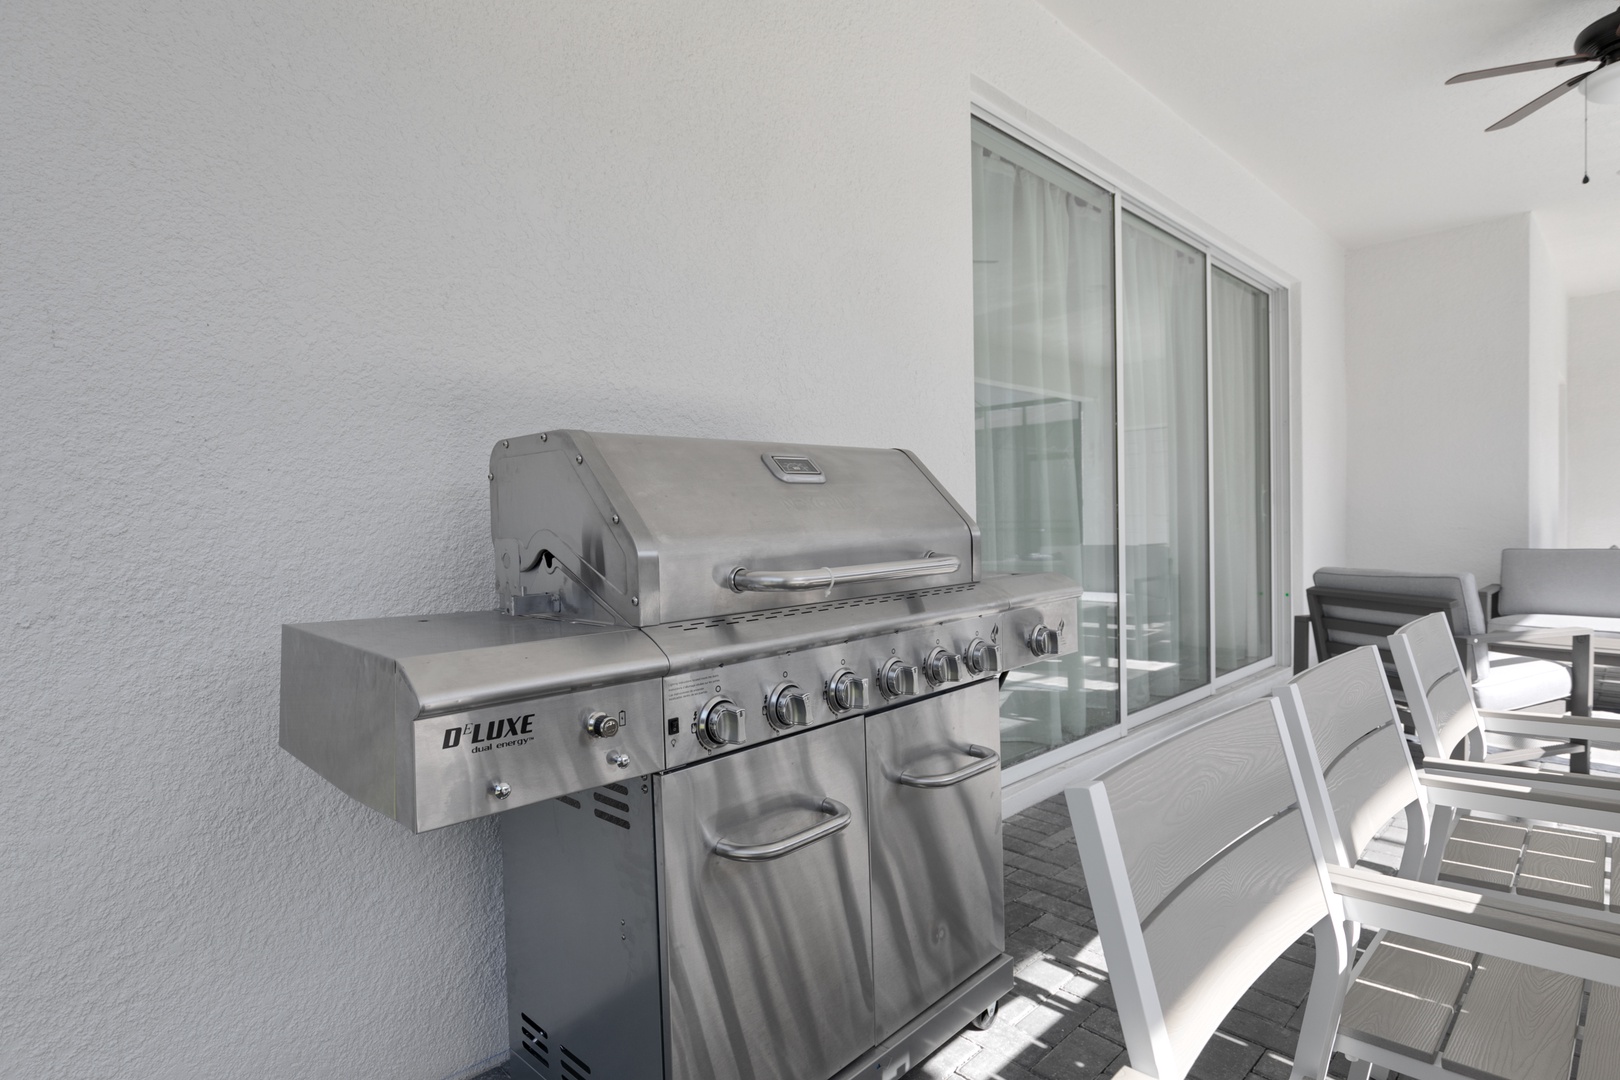 Enjoy the fresh air & relax while you grill up a feast!